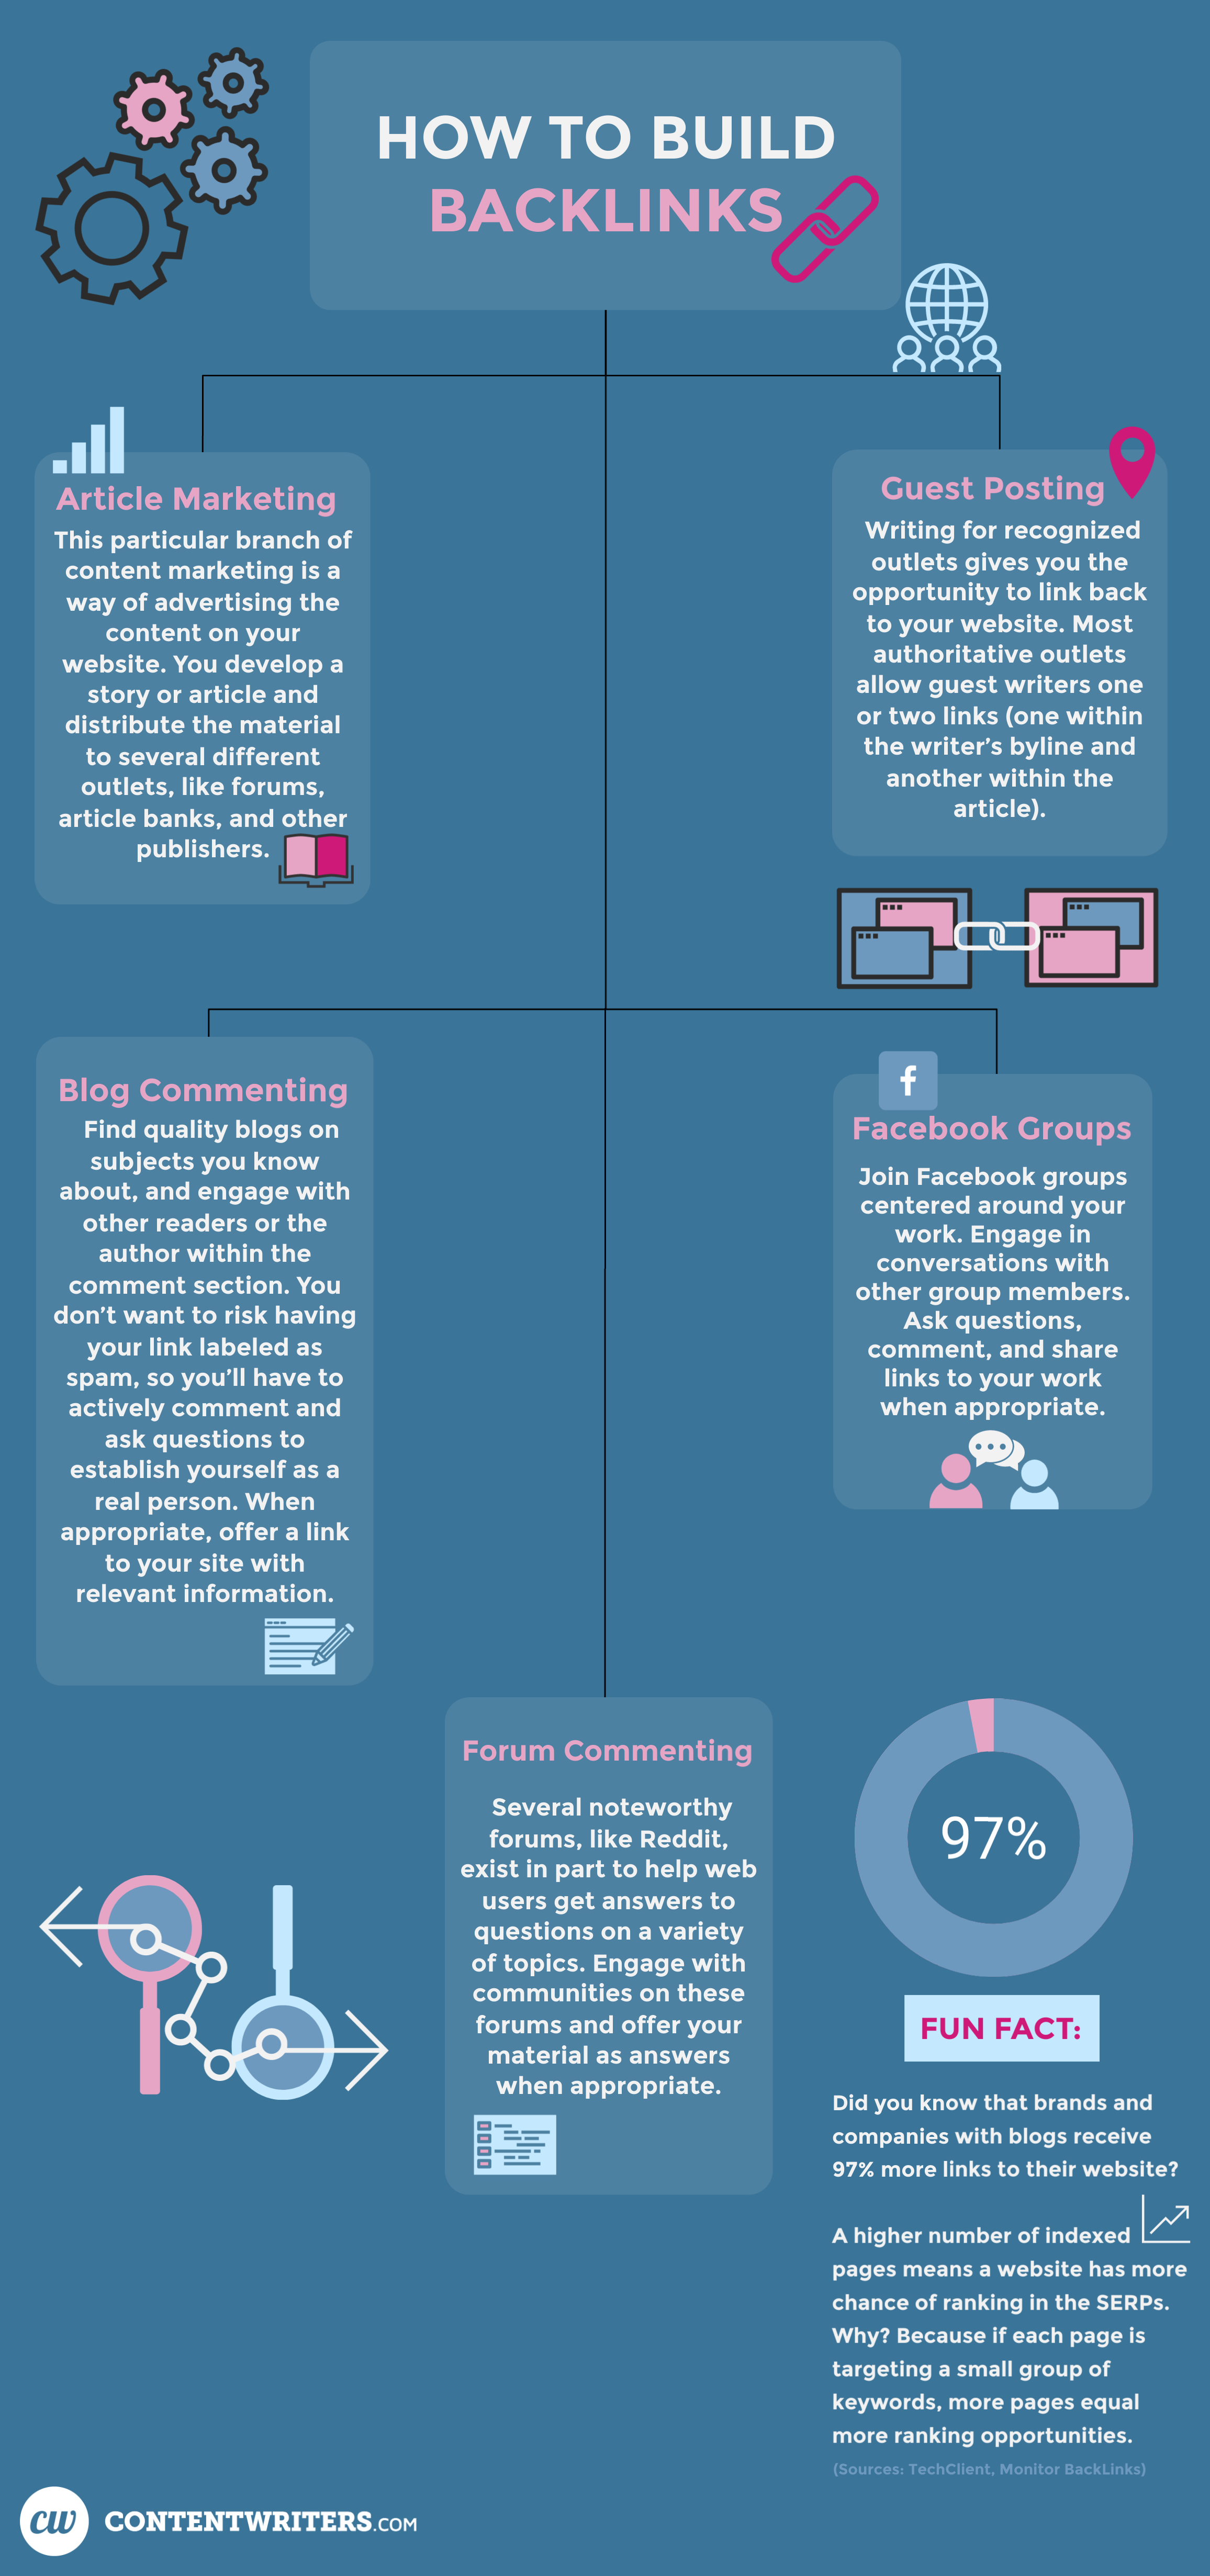 How to Build Backlinks Infographic  Article Marketing Guest Posting Blog Commenting Facebook Groups Forum Commenting ContentWriters